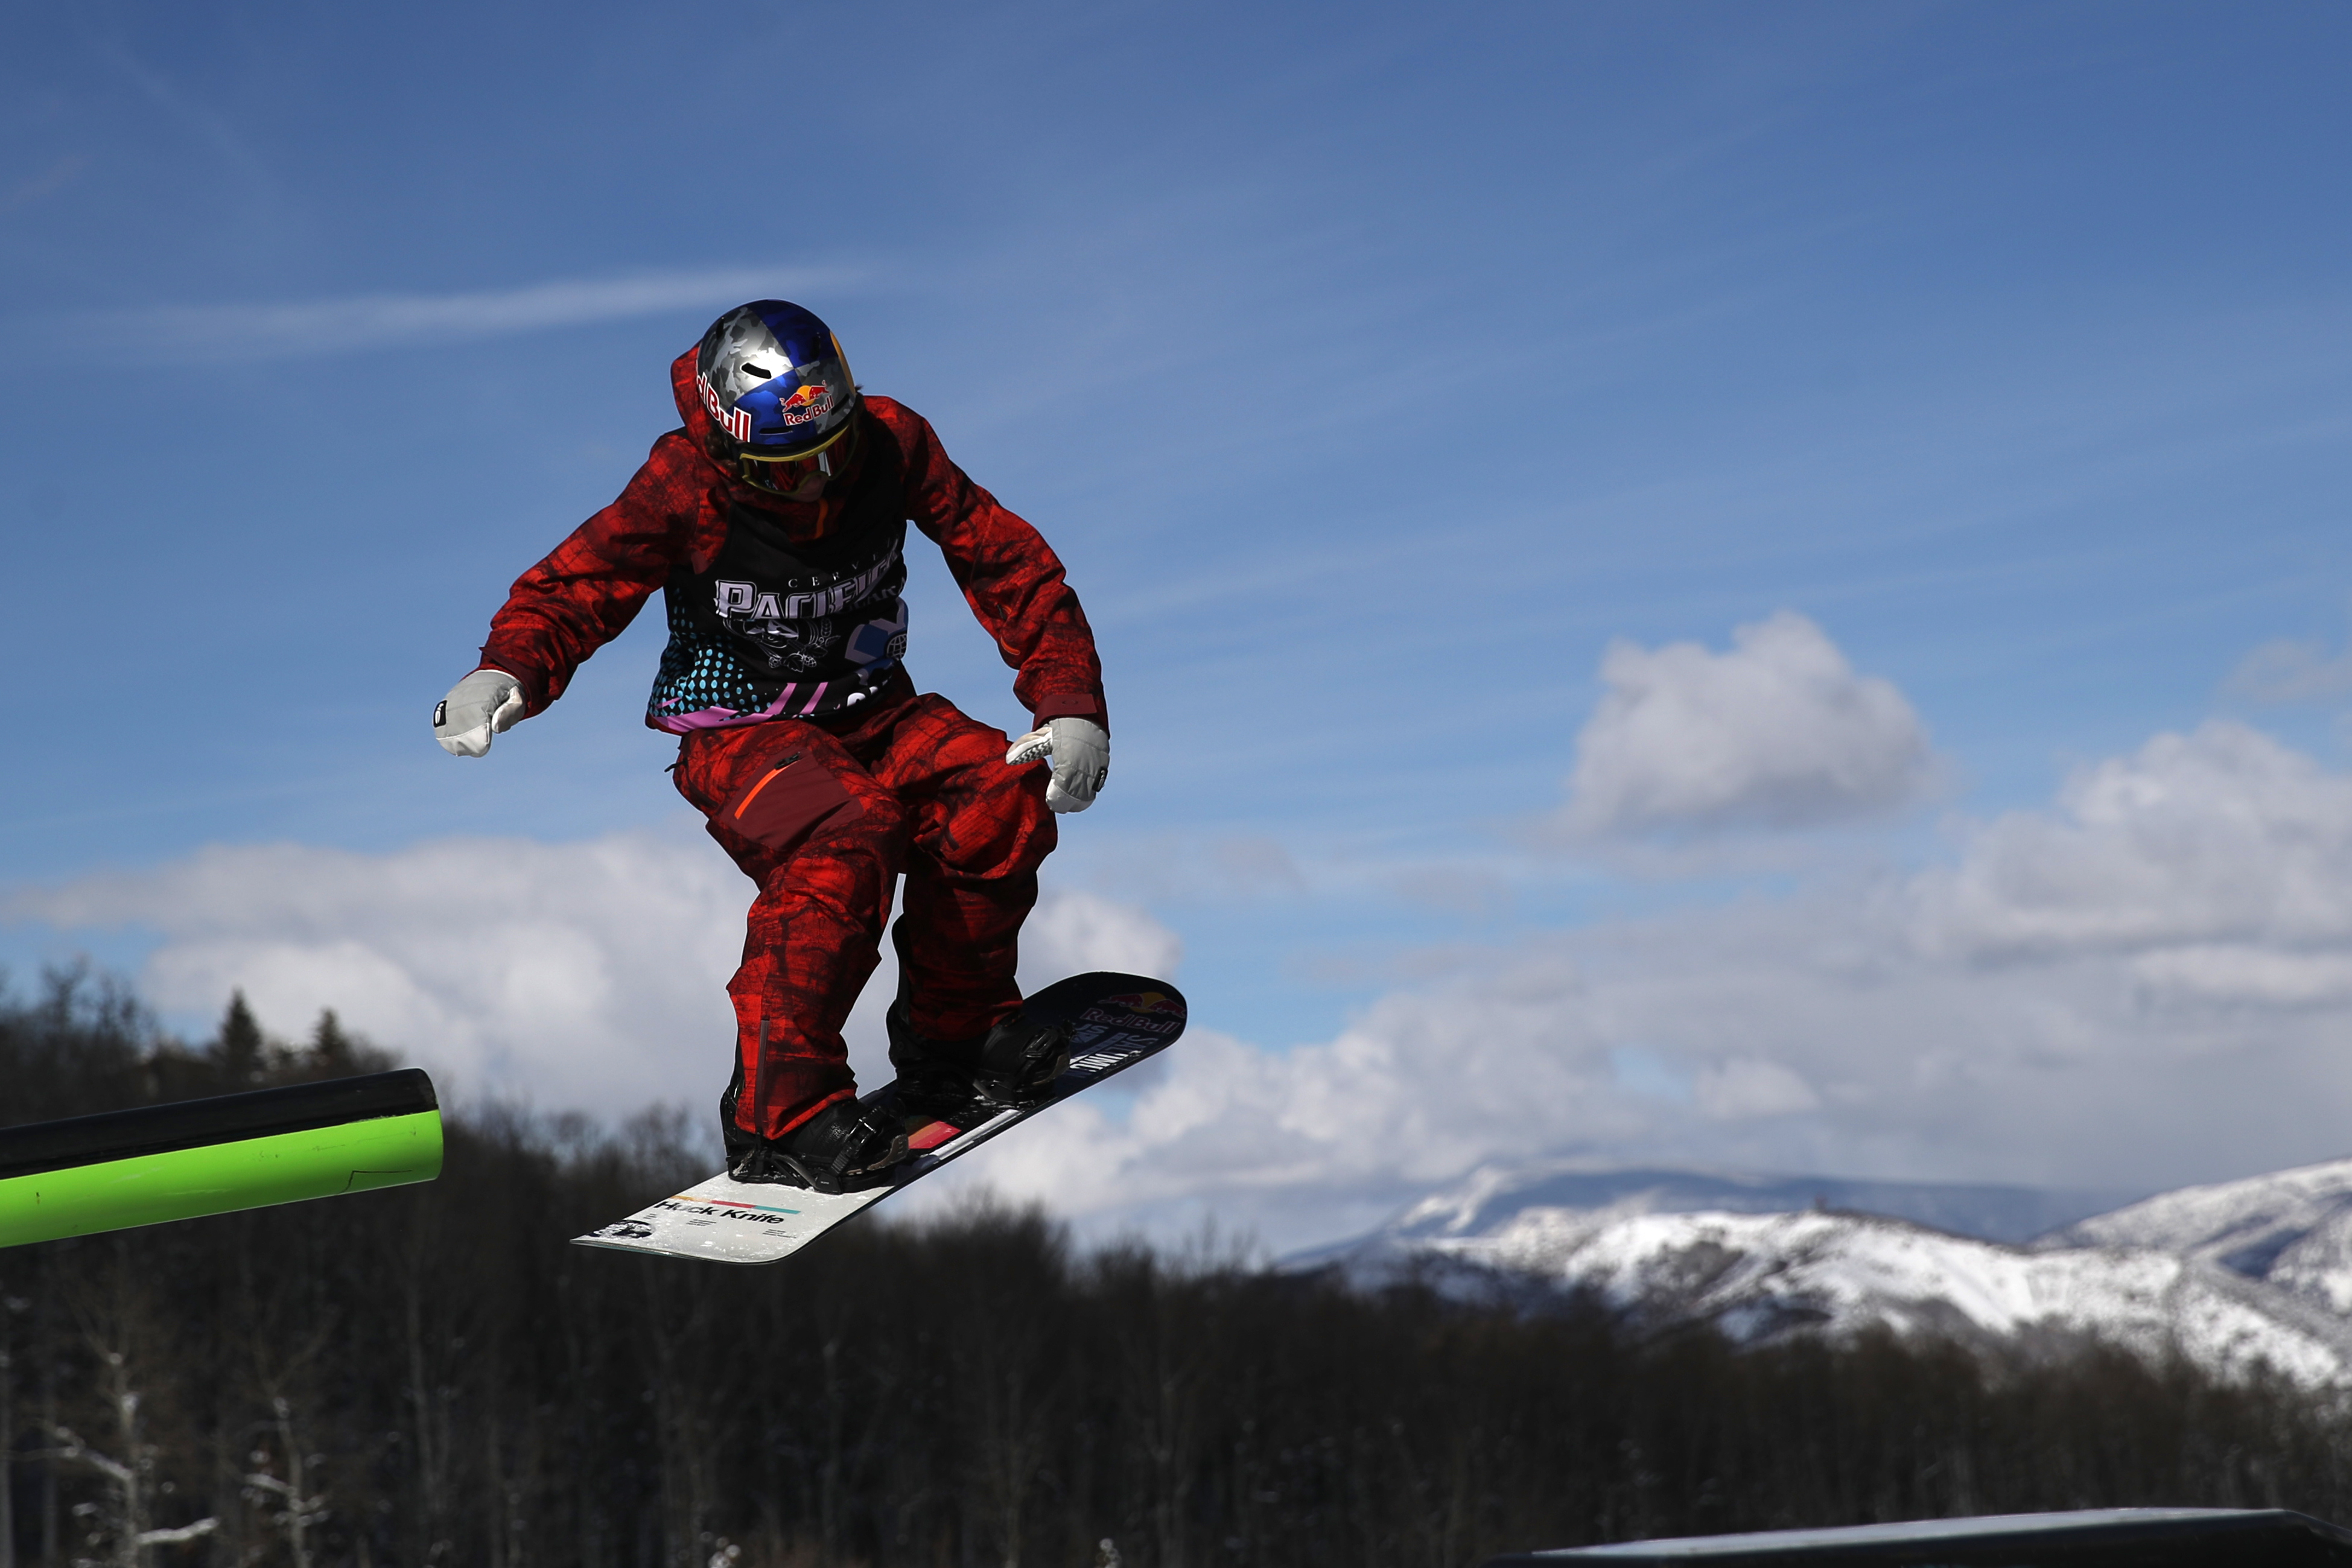 Judd Henkes practices prior to the Men's Snowboard Slopestyle Elimination at the 2019 Winter X Games on January 25, 2019 in Aspen, Colorado.